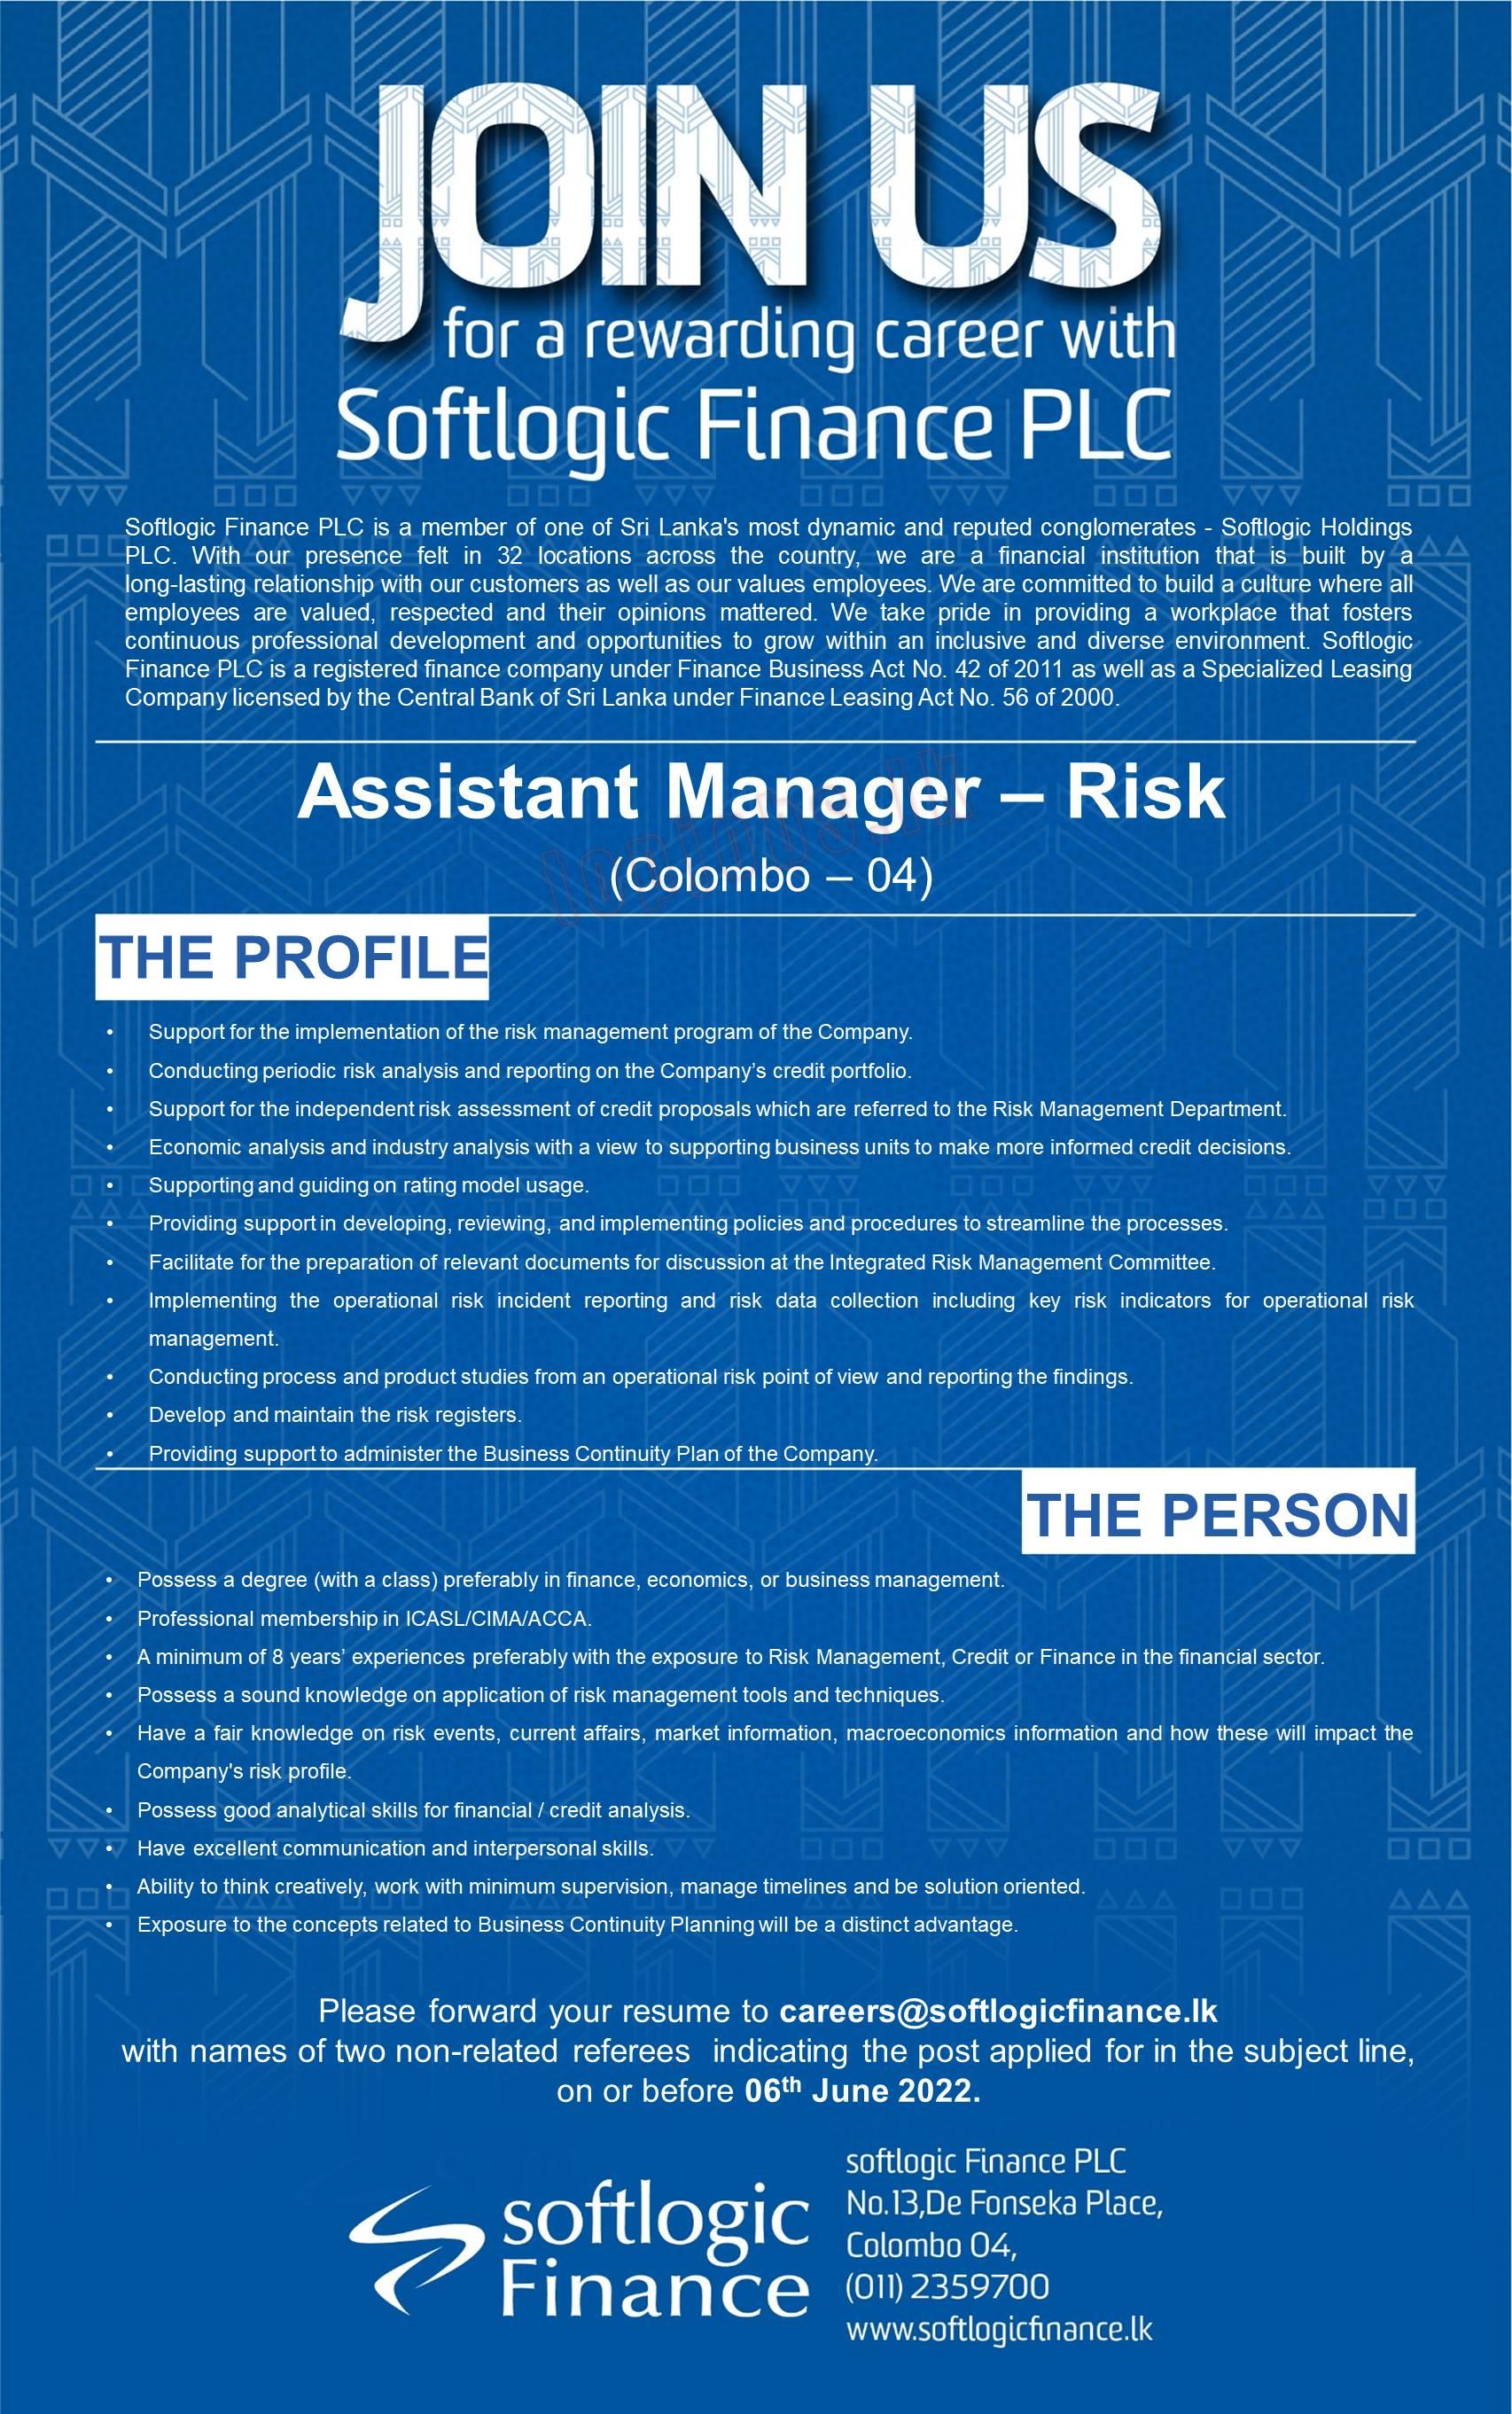 Assistant Manager of Risk Vacancy - Softlogic Holdings PLC Jobs Vacancies